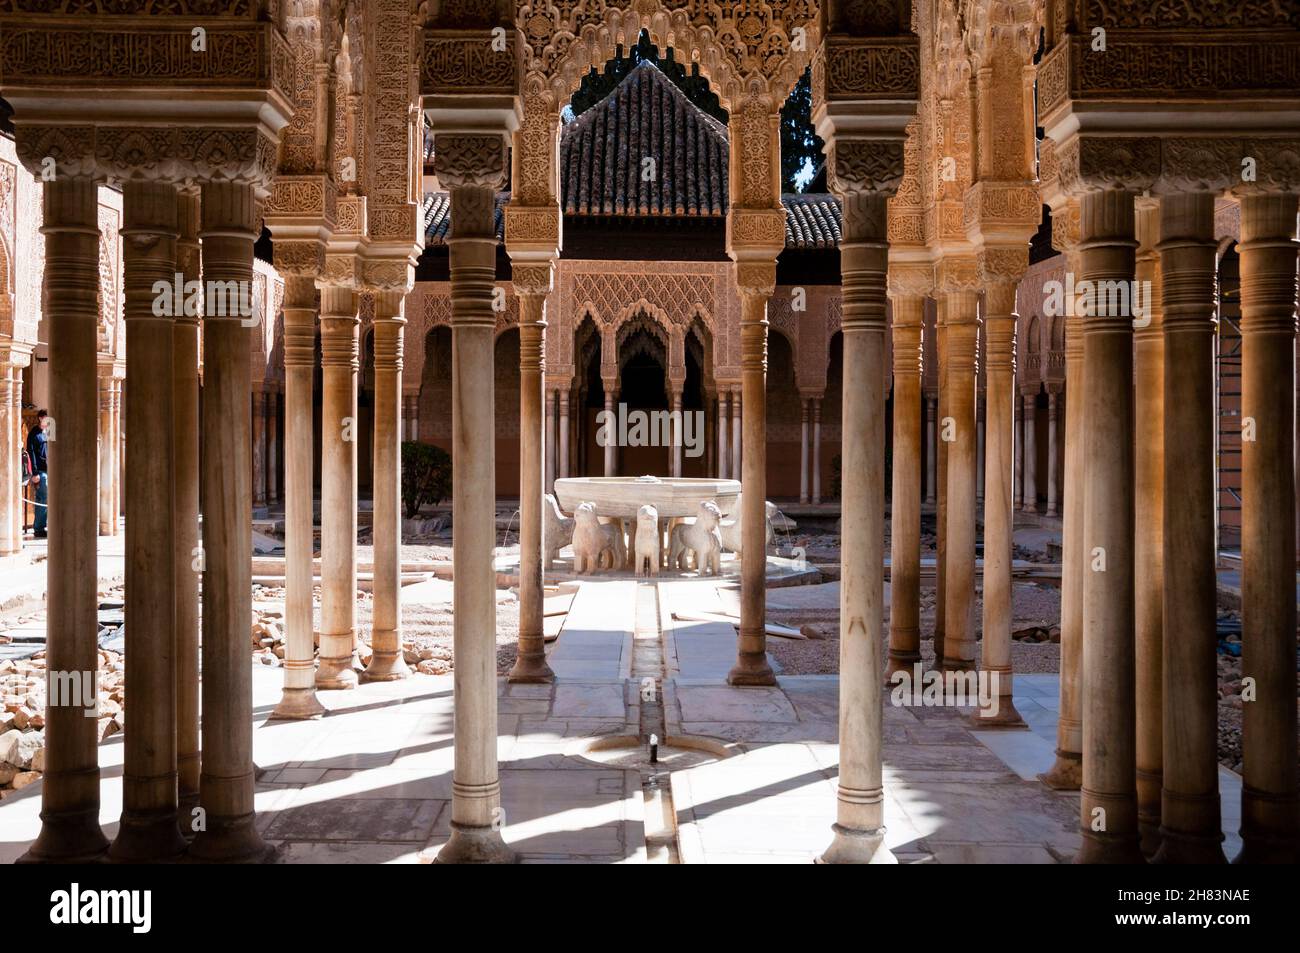 Fountain of the Lions at Alhambra in Granada, Spain. Stock Photo